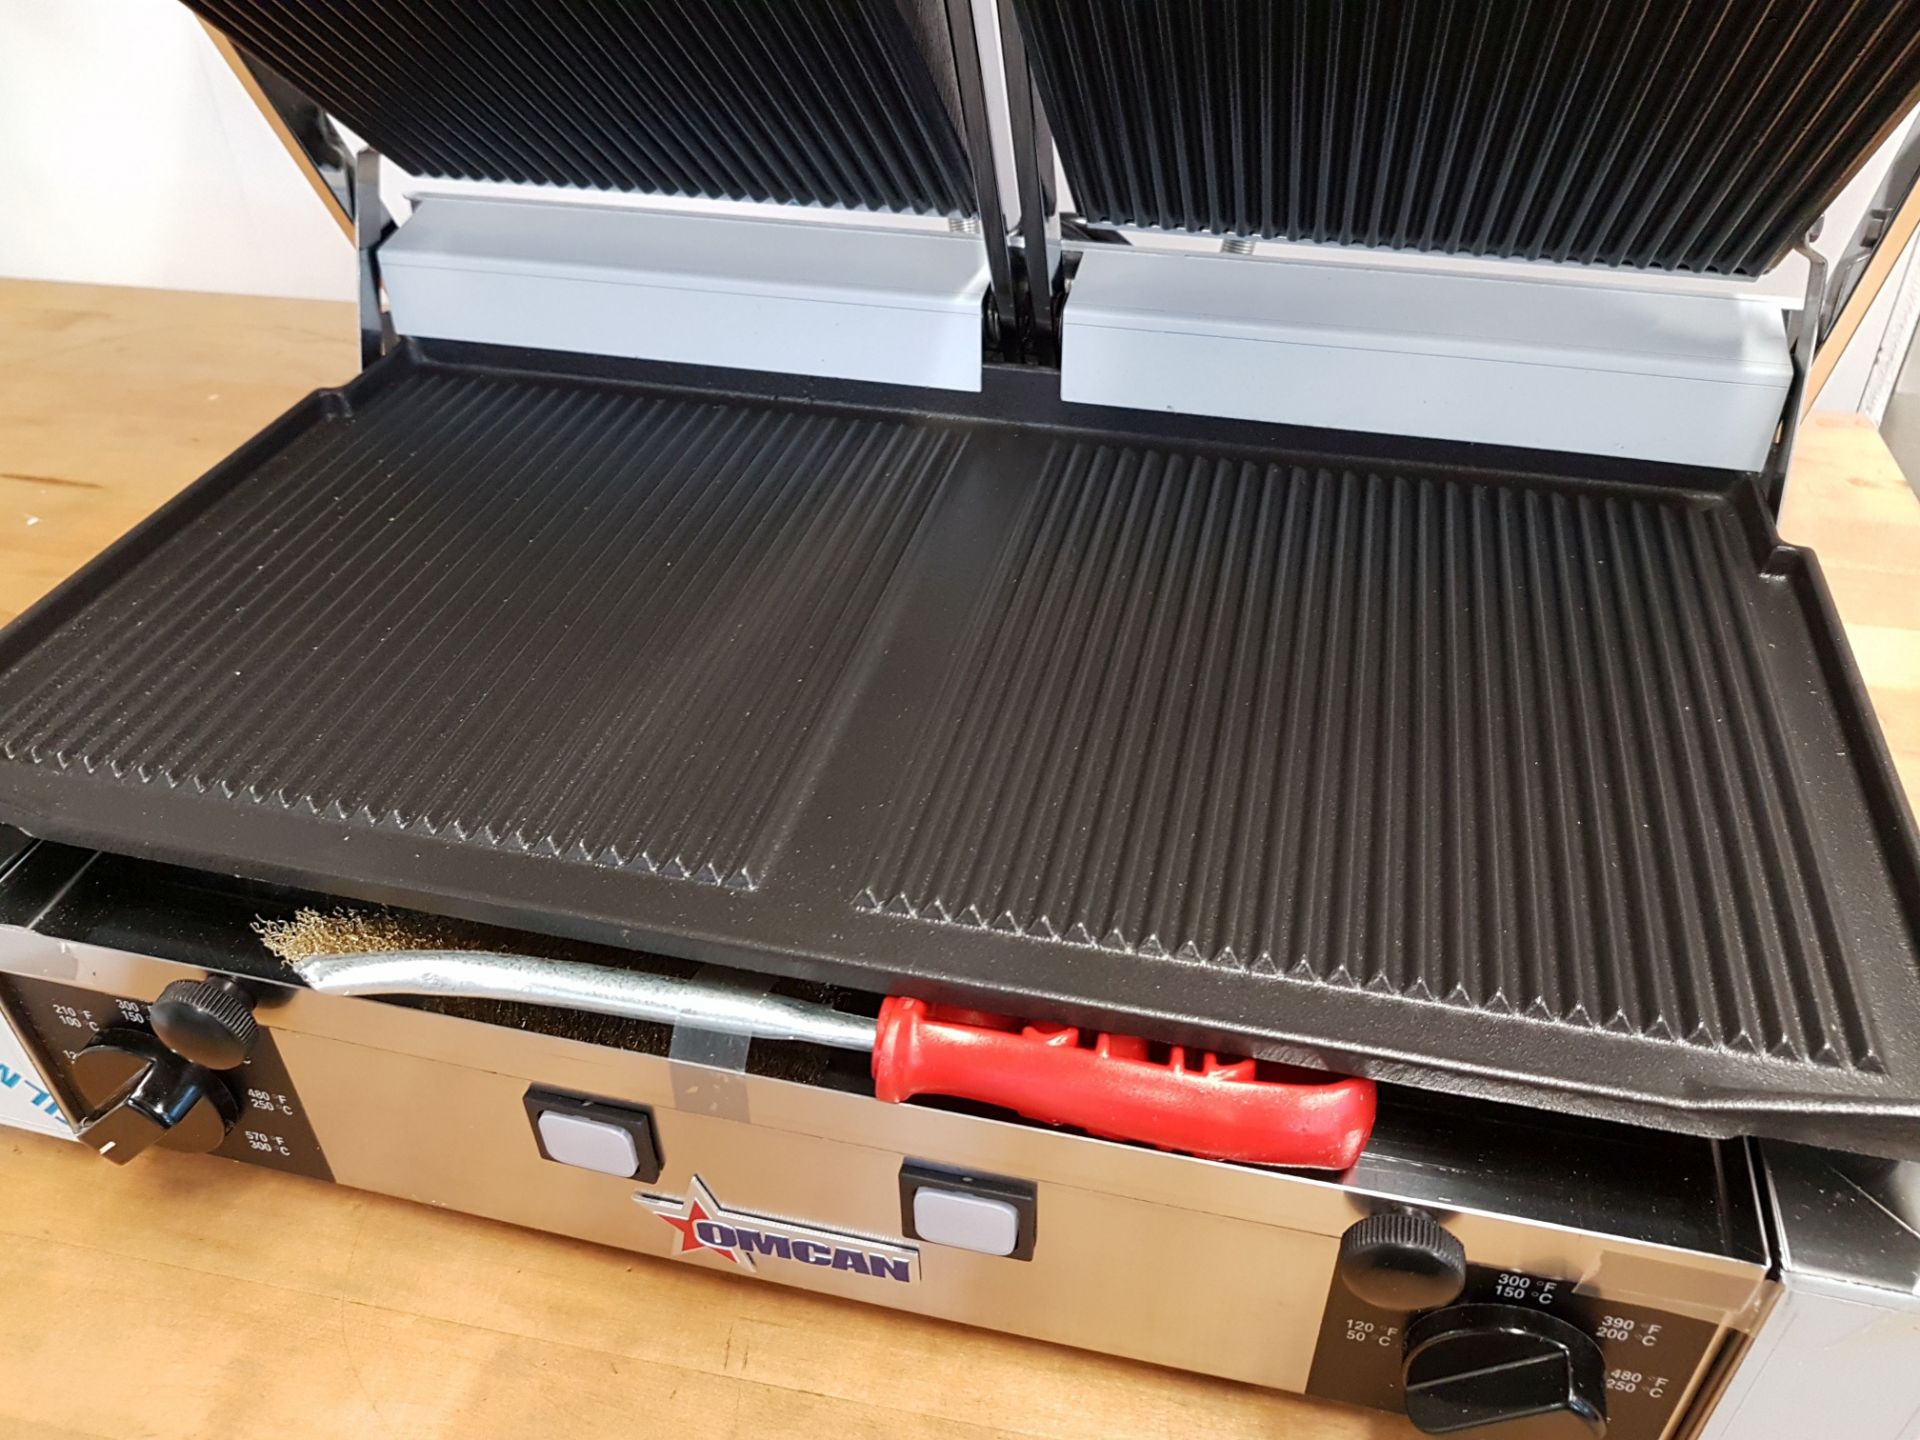 Omcan Double Panini Grill - Model PDR E - Image 2 of 4